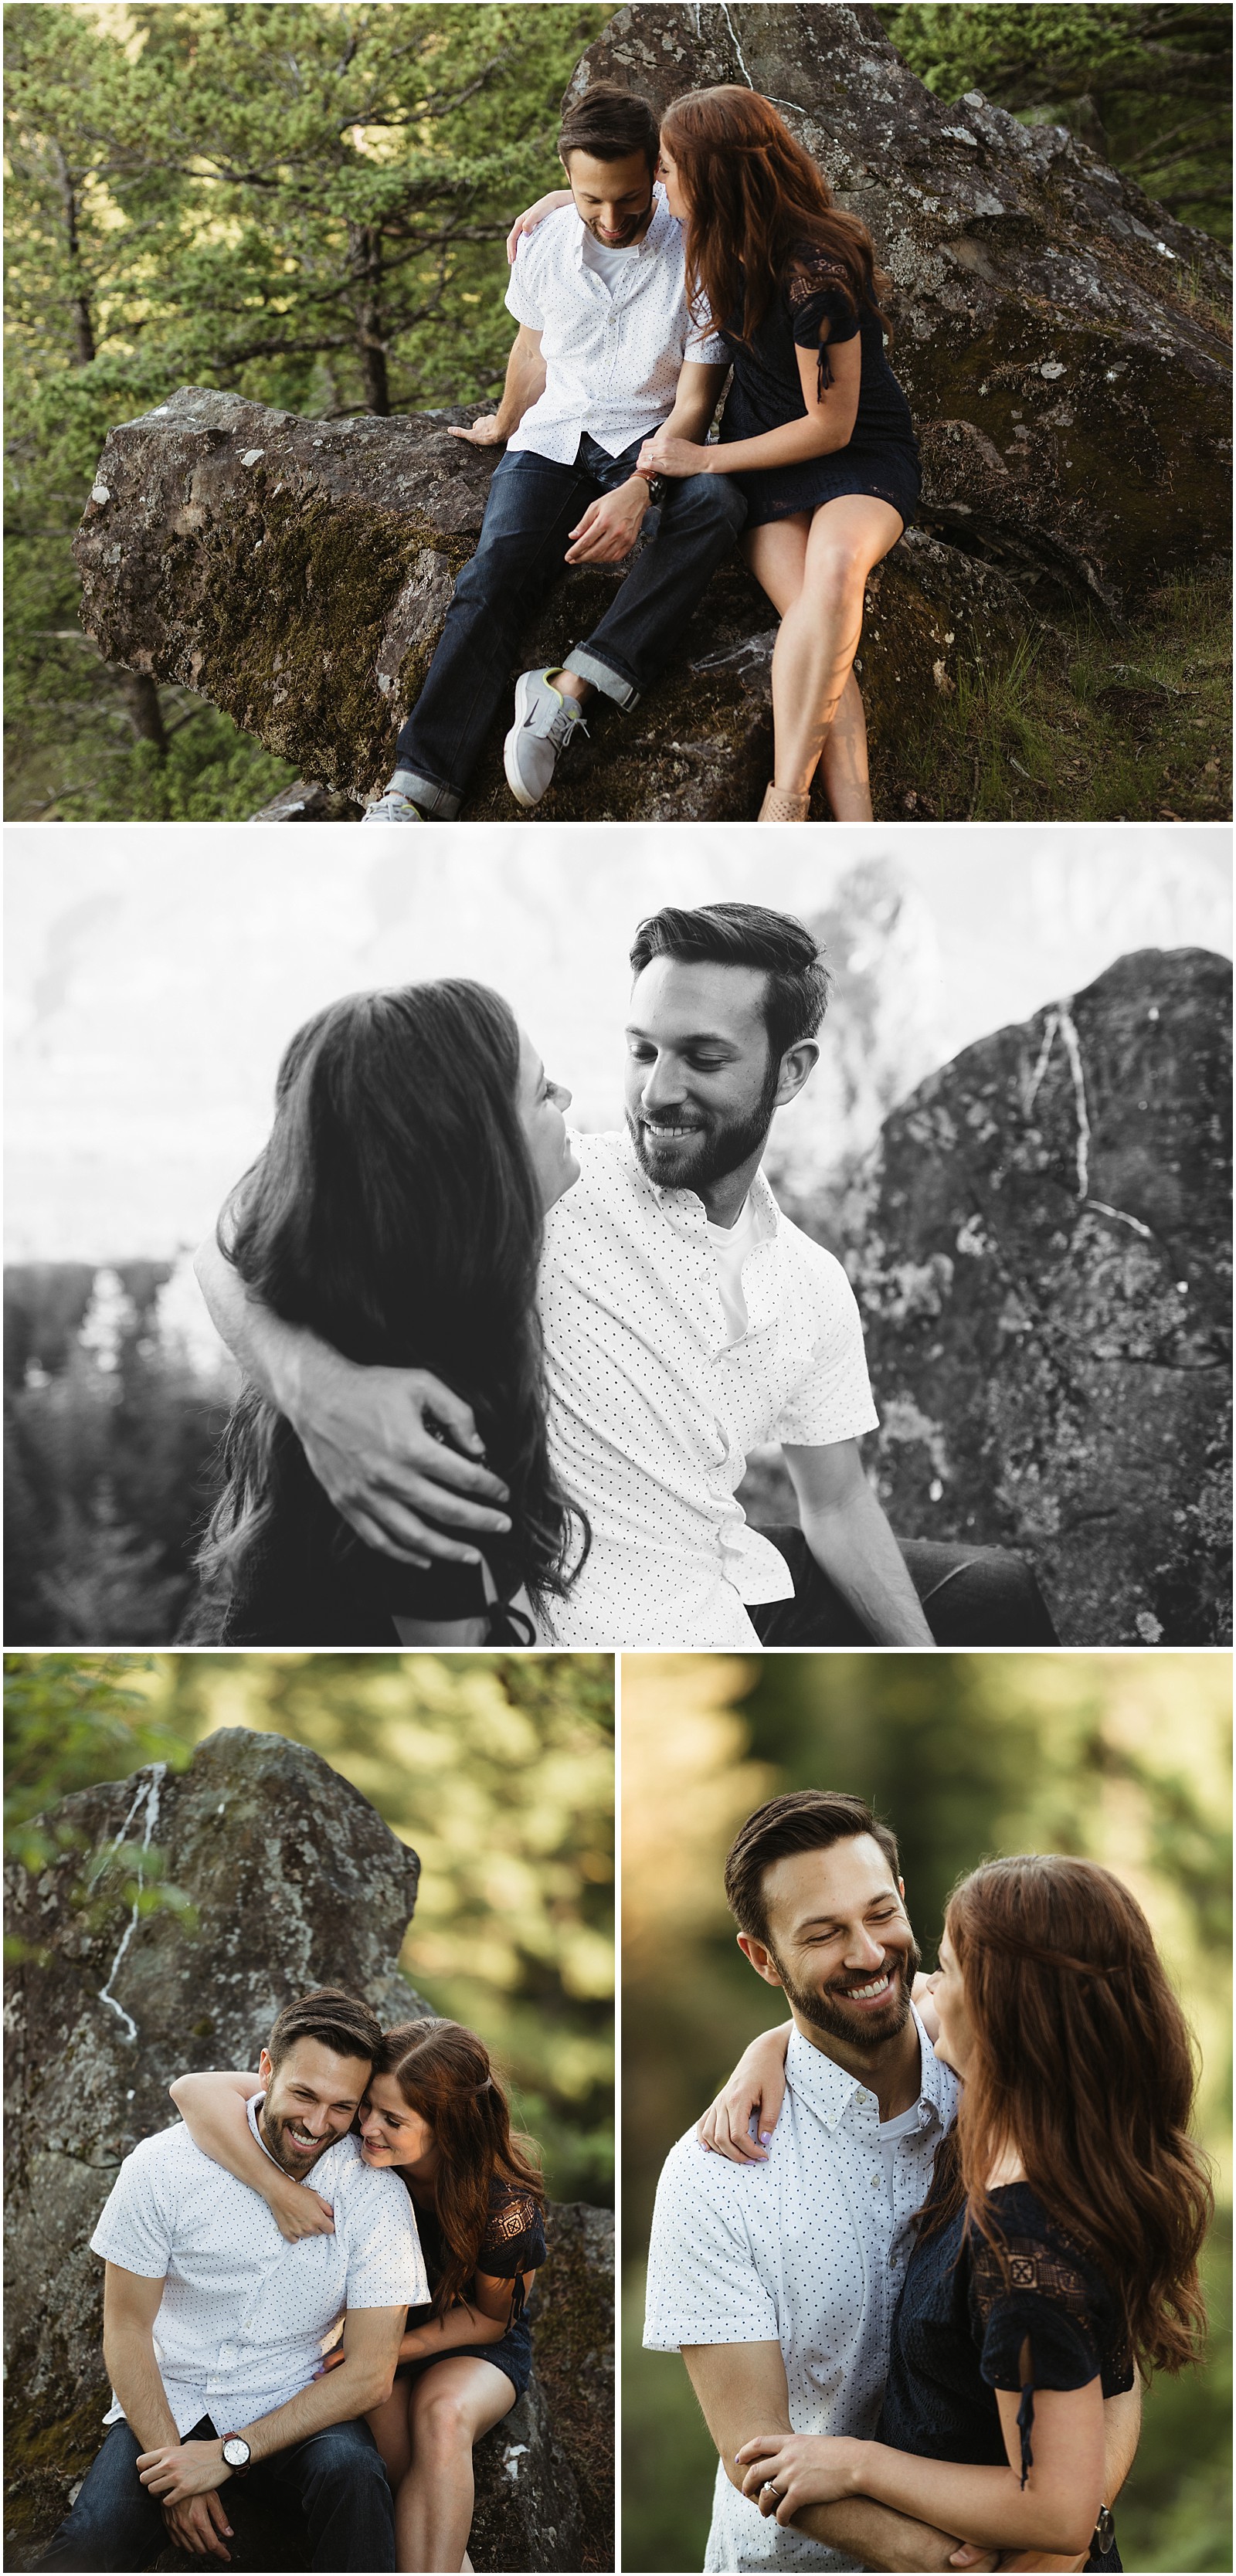 Romantic engagement shoot in the Columbia River Gorge